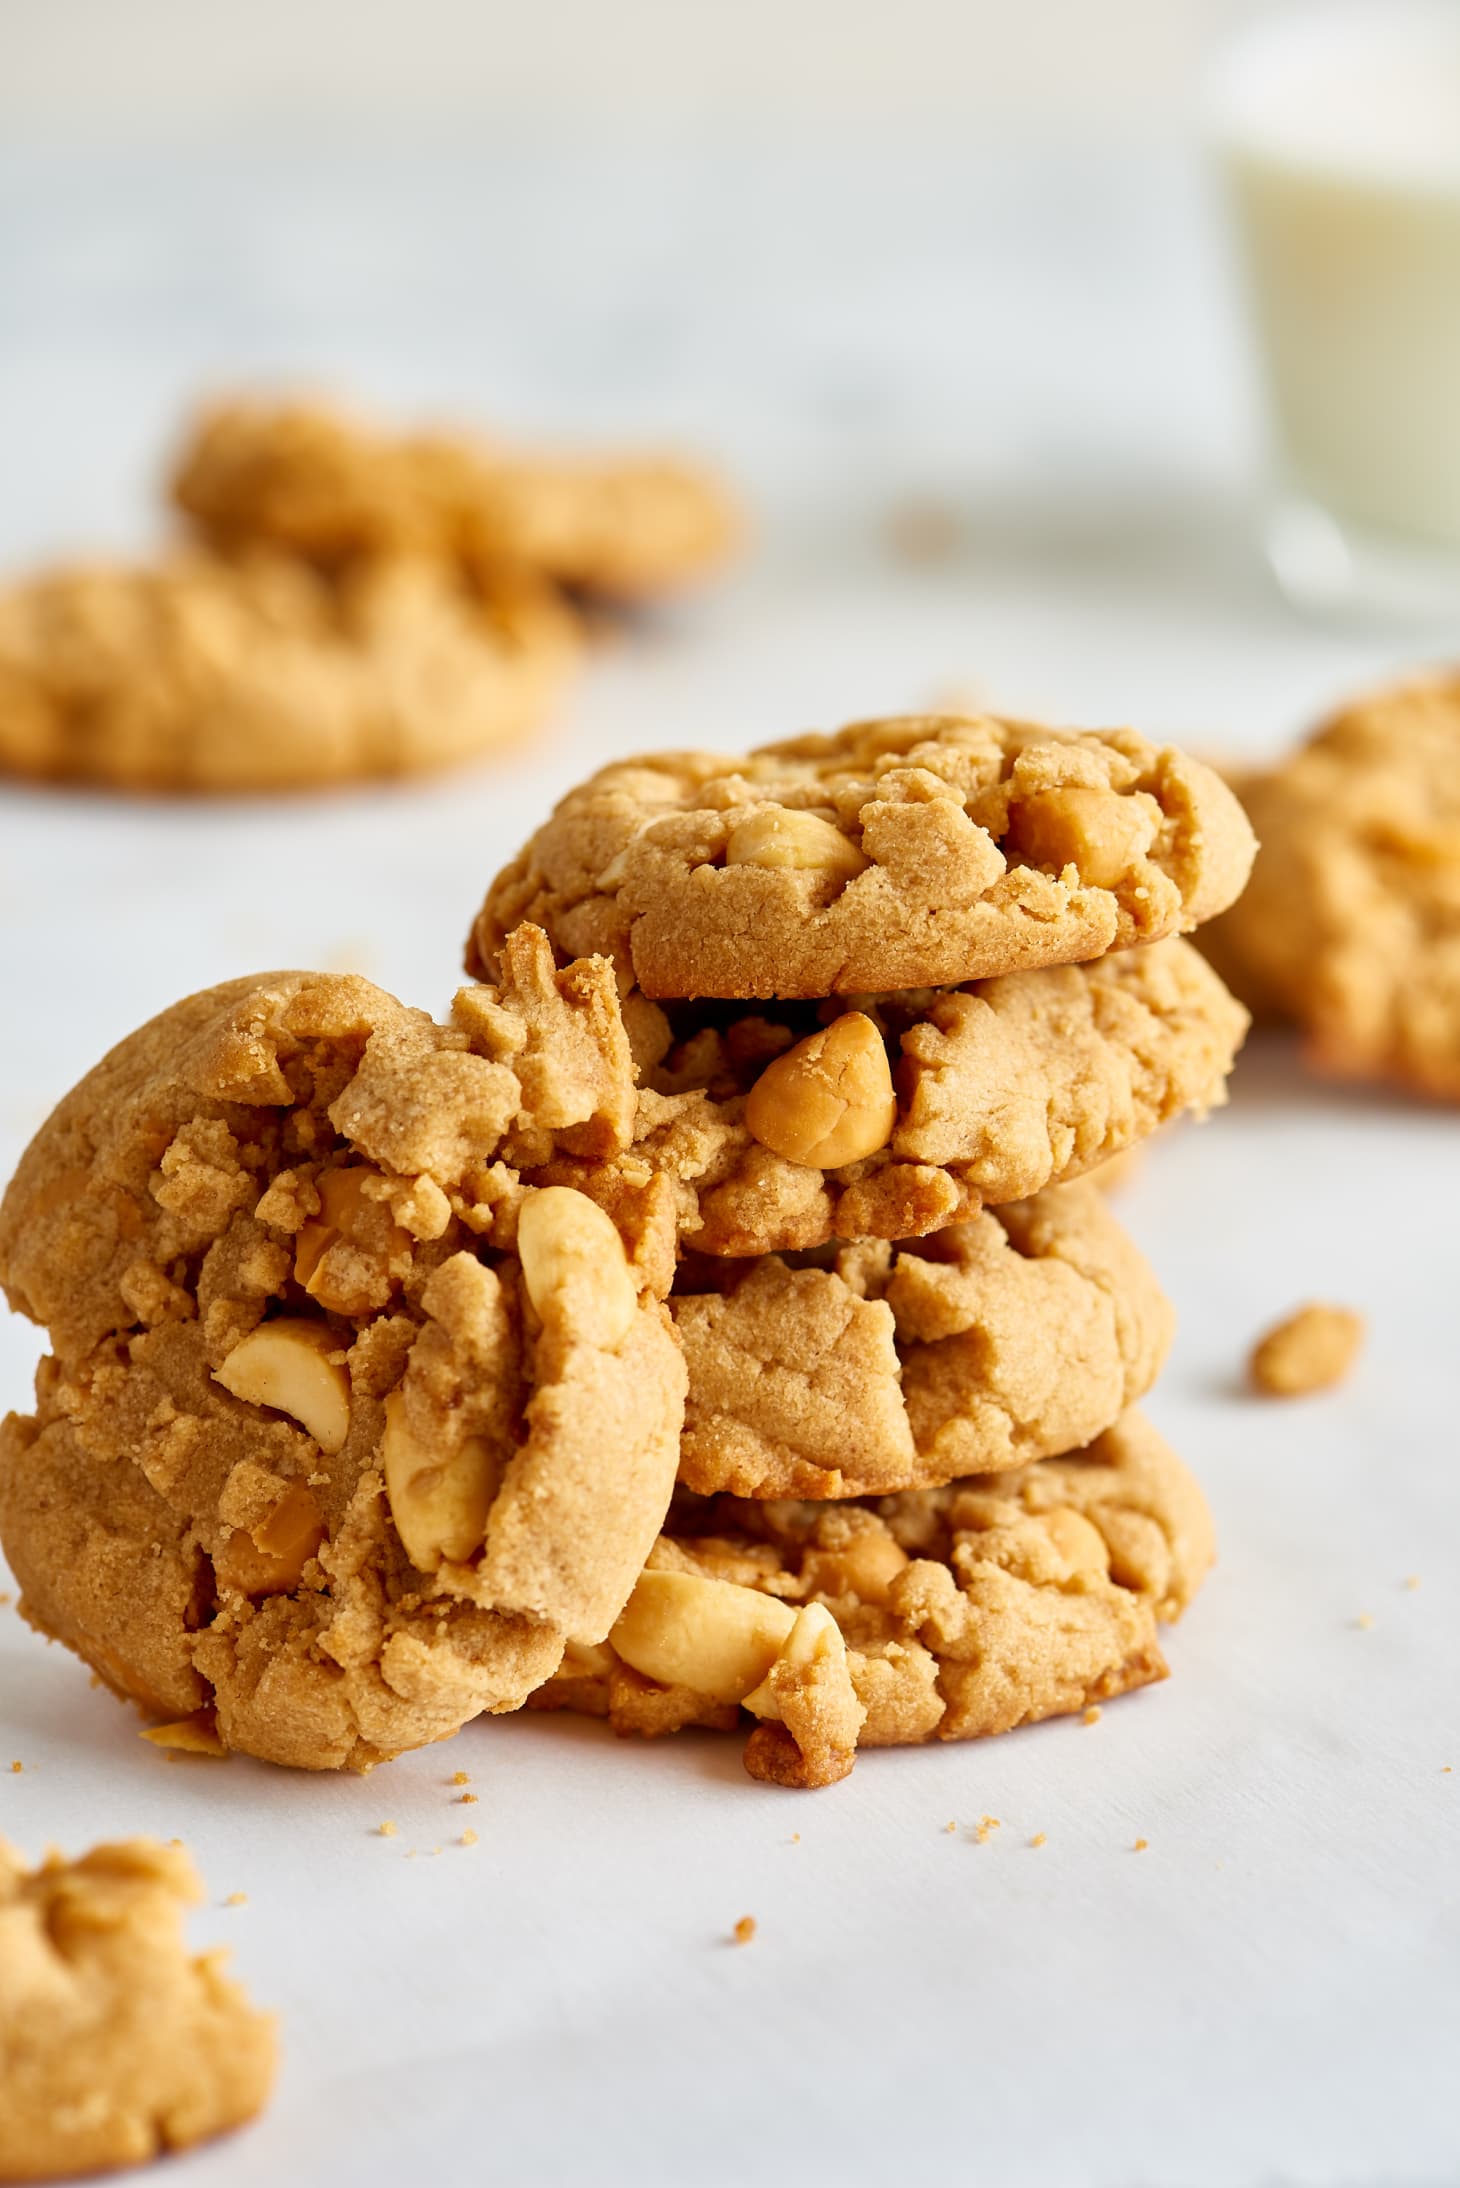 How To Make Soft & Chewy Peanut Butter Cookies | Kitchn